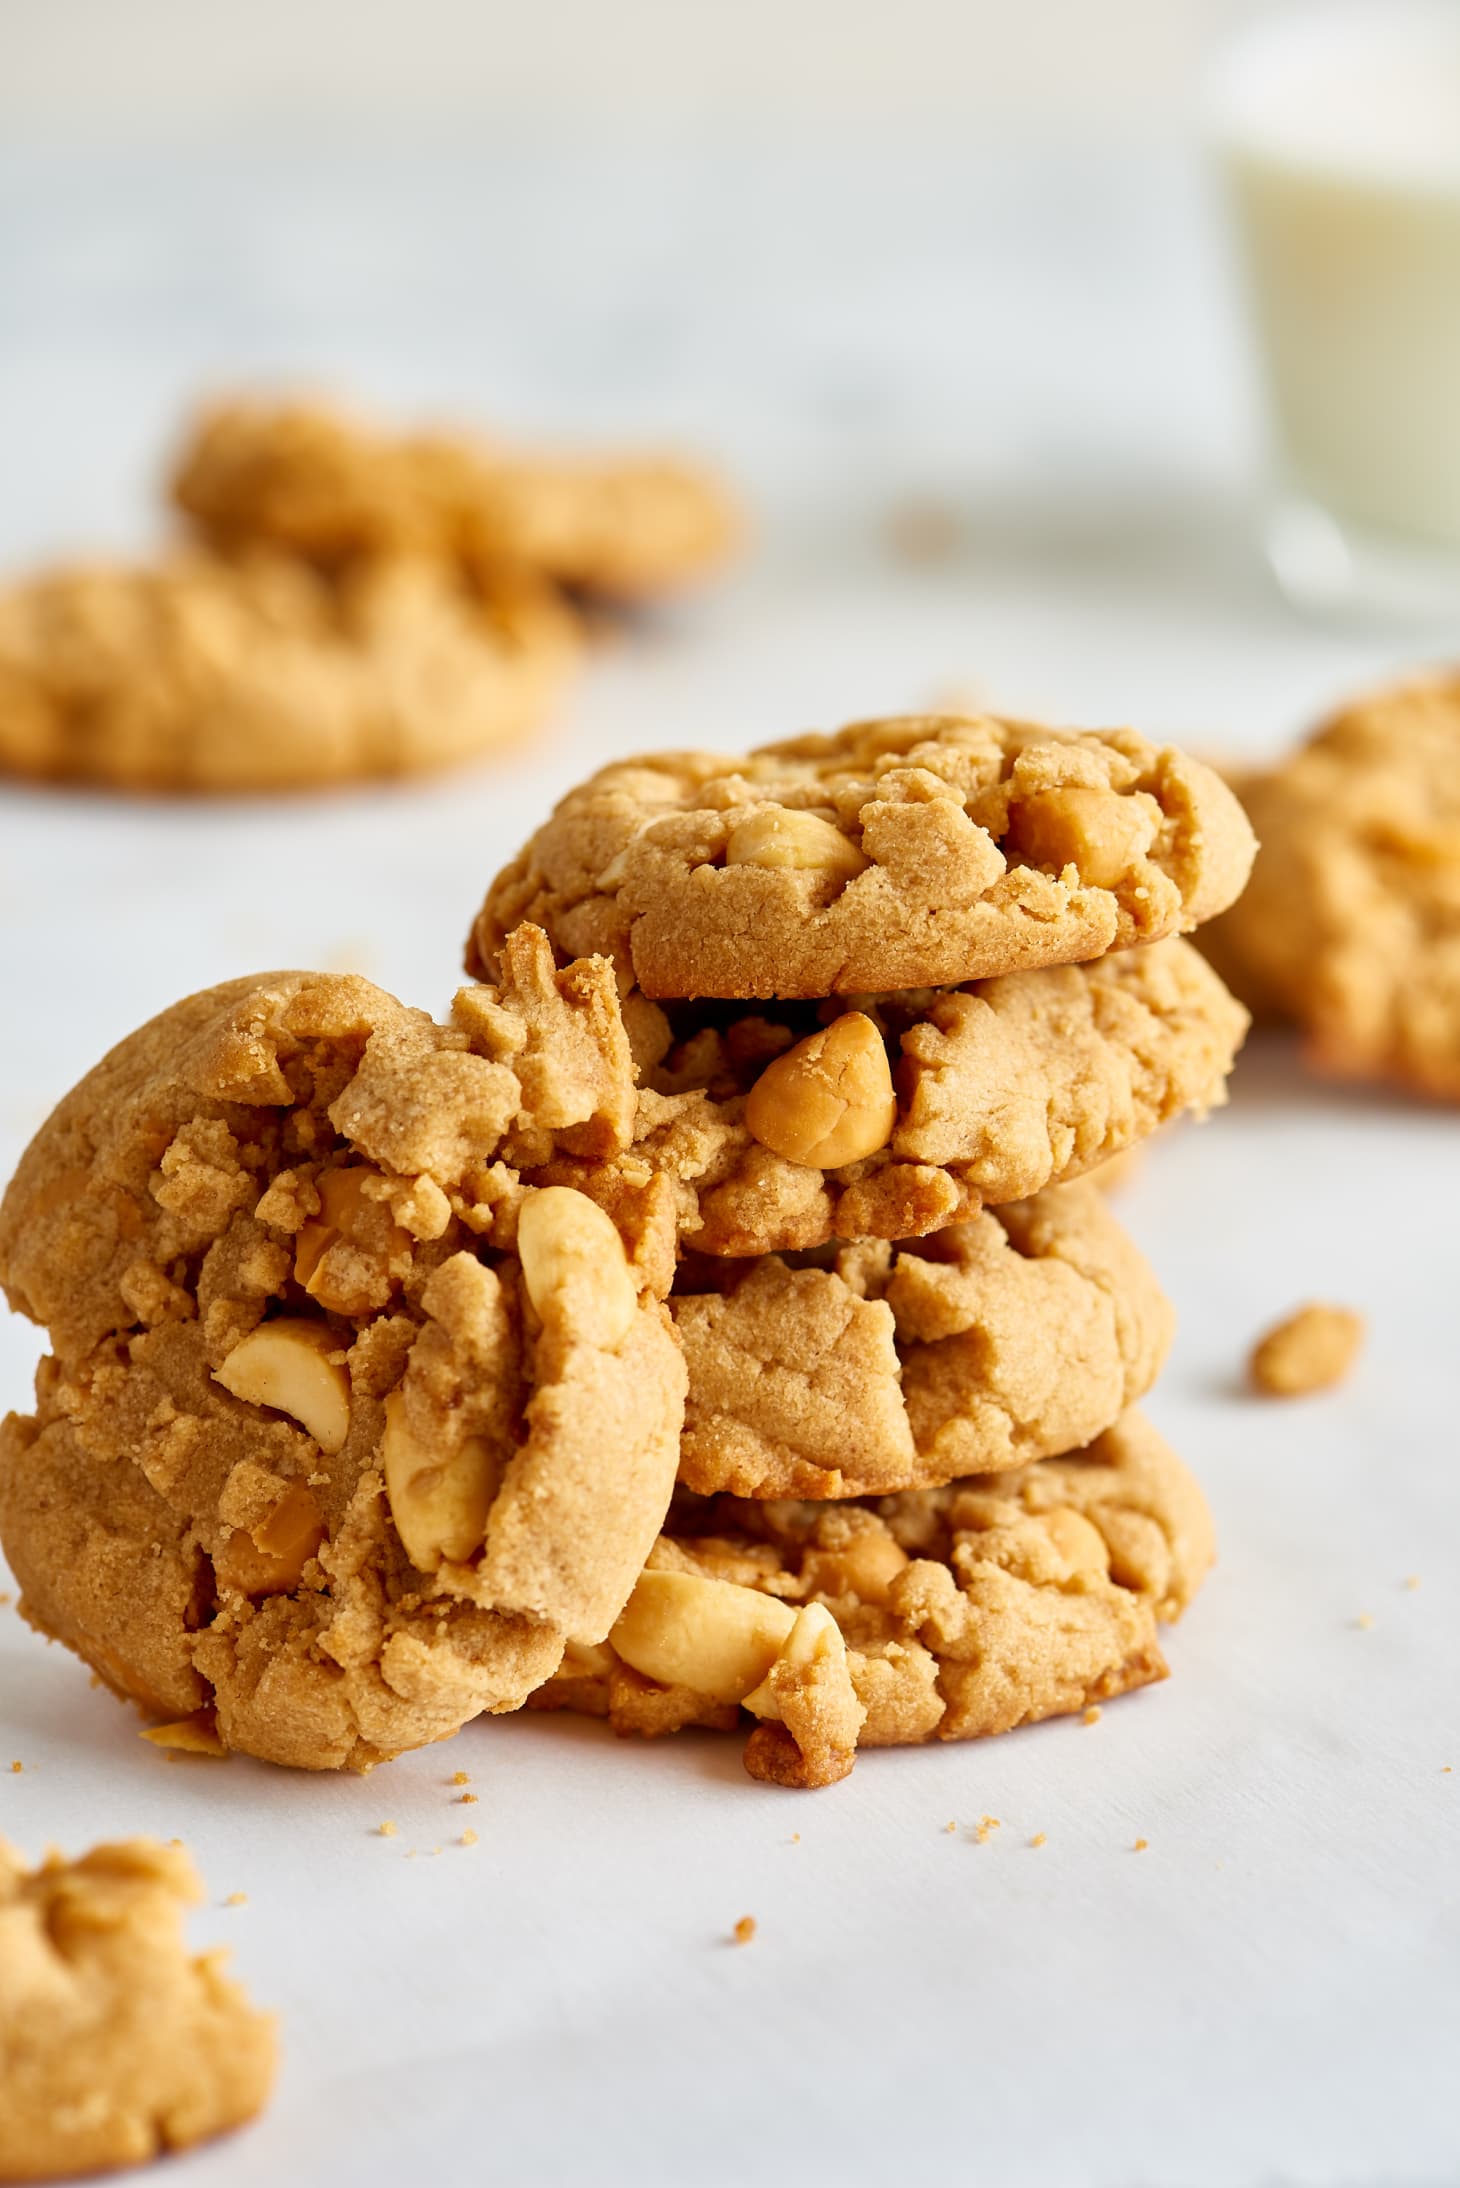 How To Make Soft & Chewy Peanut Butter Cookies | Kitchn